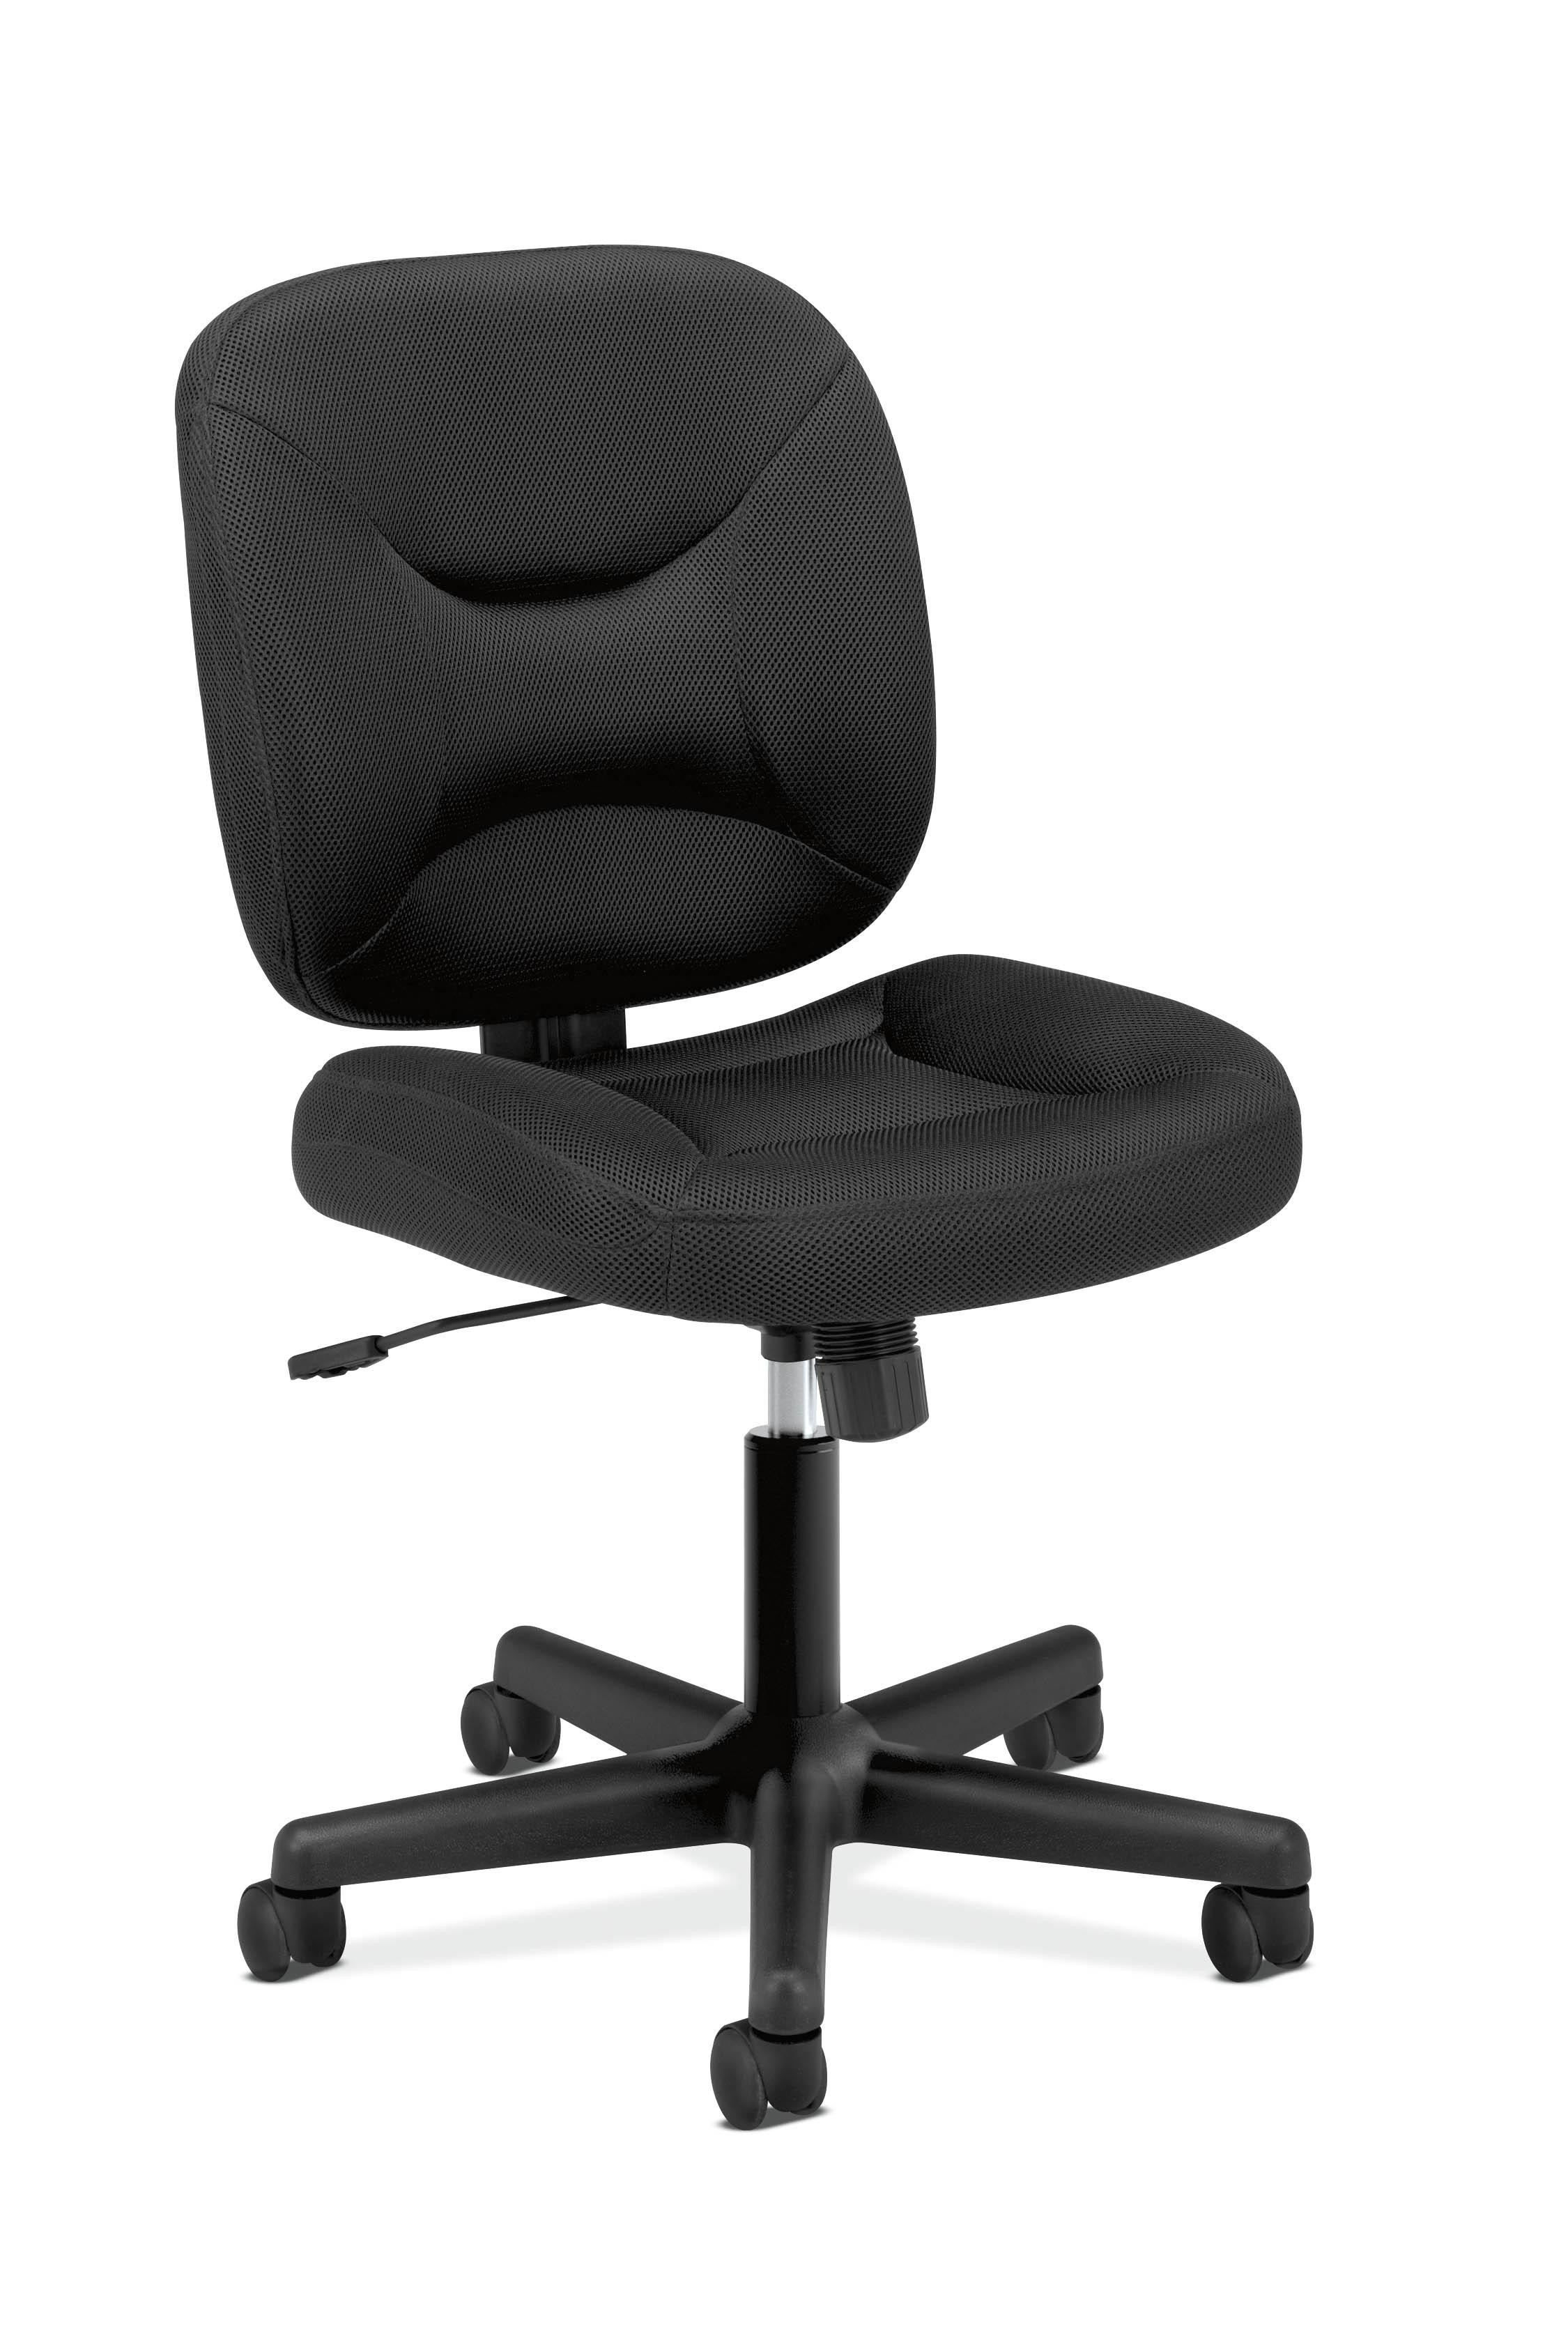 20 Of the Best Ideas for Amazon Computer Chair - Best Collections Ever